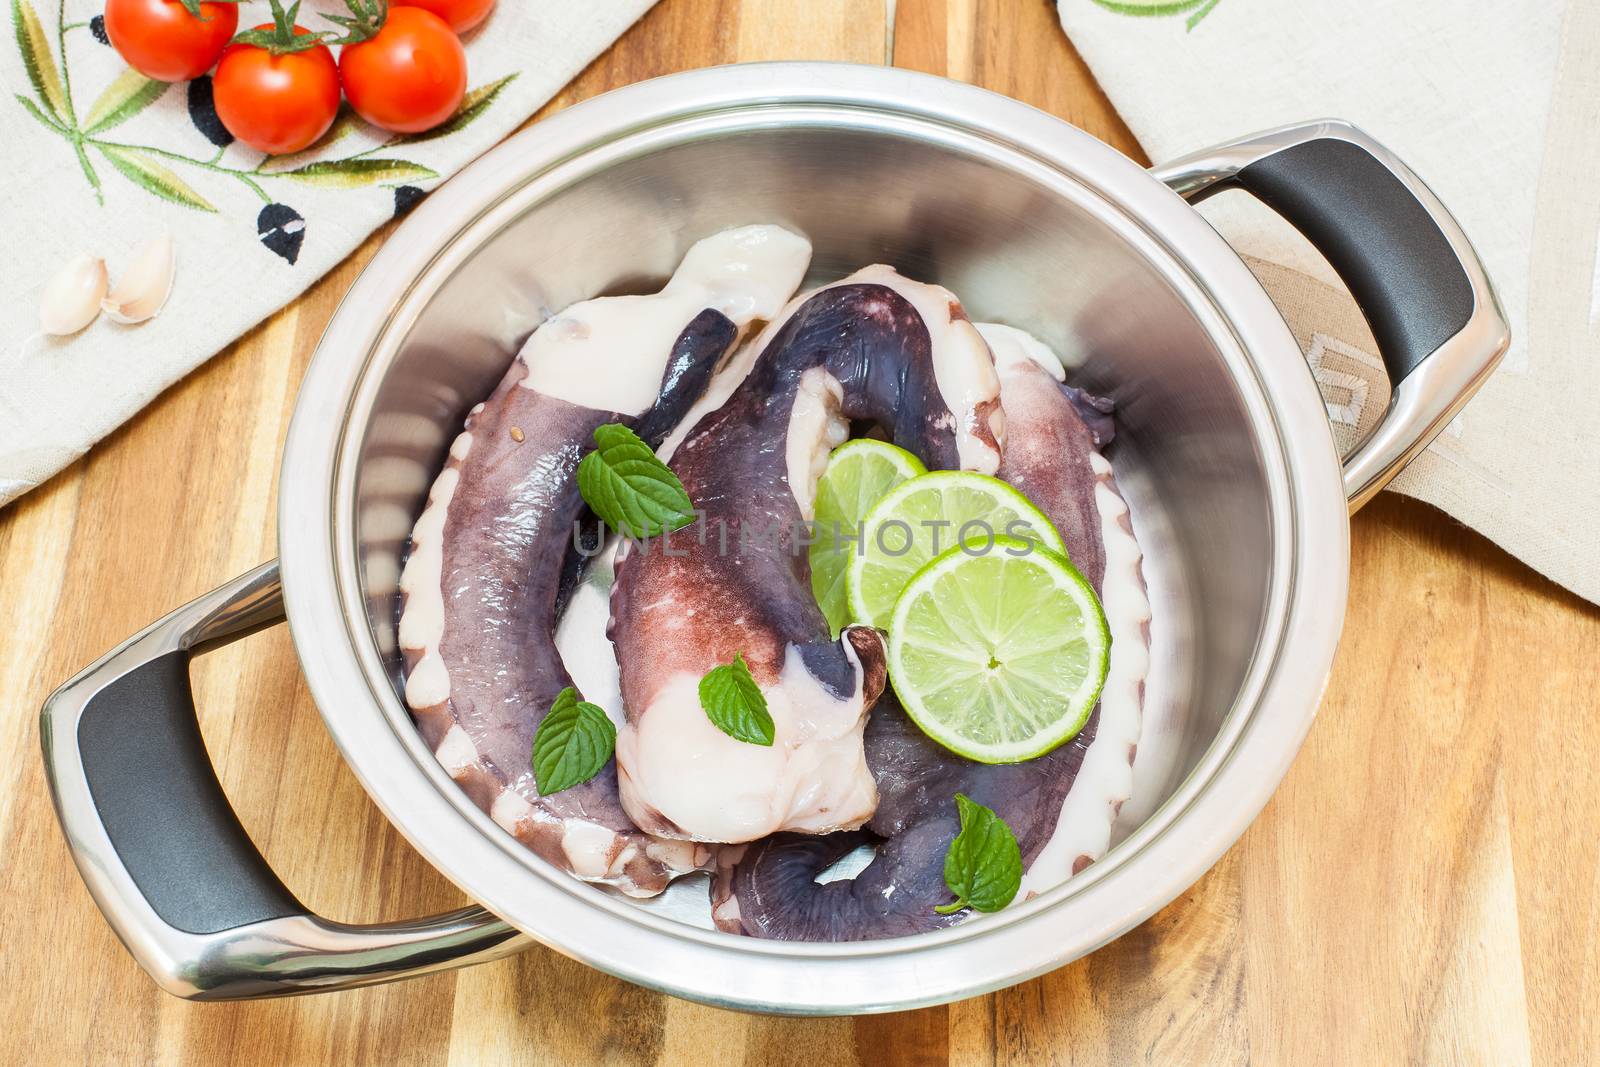 .Fresh octopus in a kitchen, with green basil and vegetable in stainless steel pot ready for barbecue or cooking.